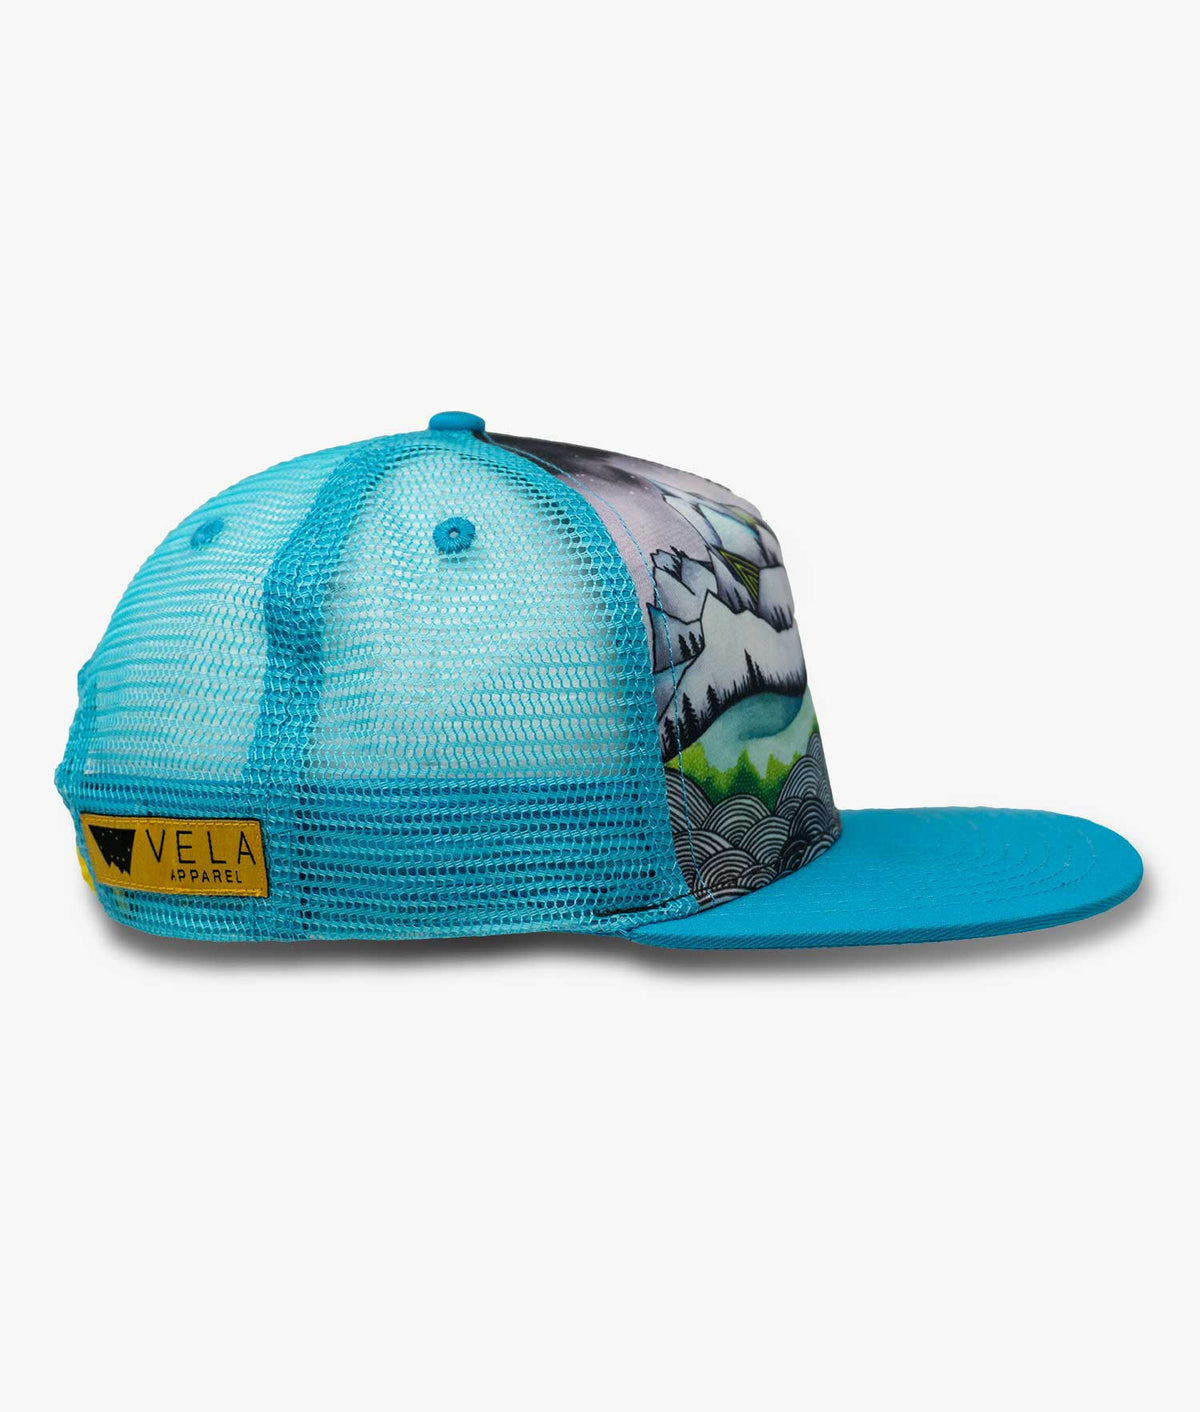 Flat Bill Trucker Snap Back Hat with Bright Blue Mesh and Bill featuring Elise Holme's Watercolor Painting of the Minaret Mountain Range